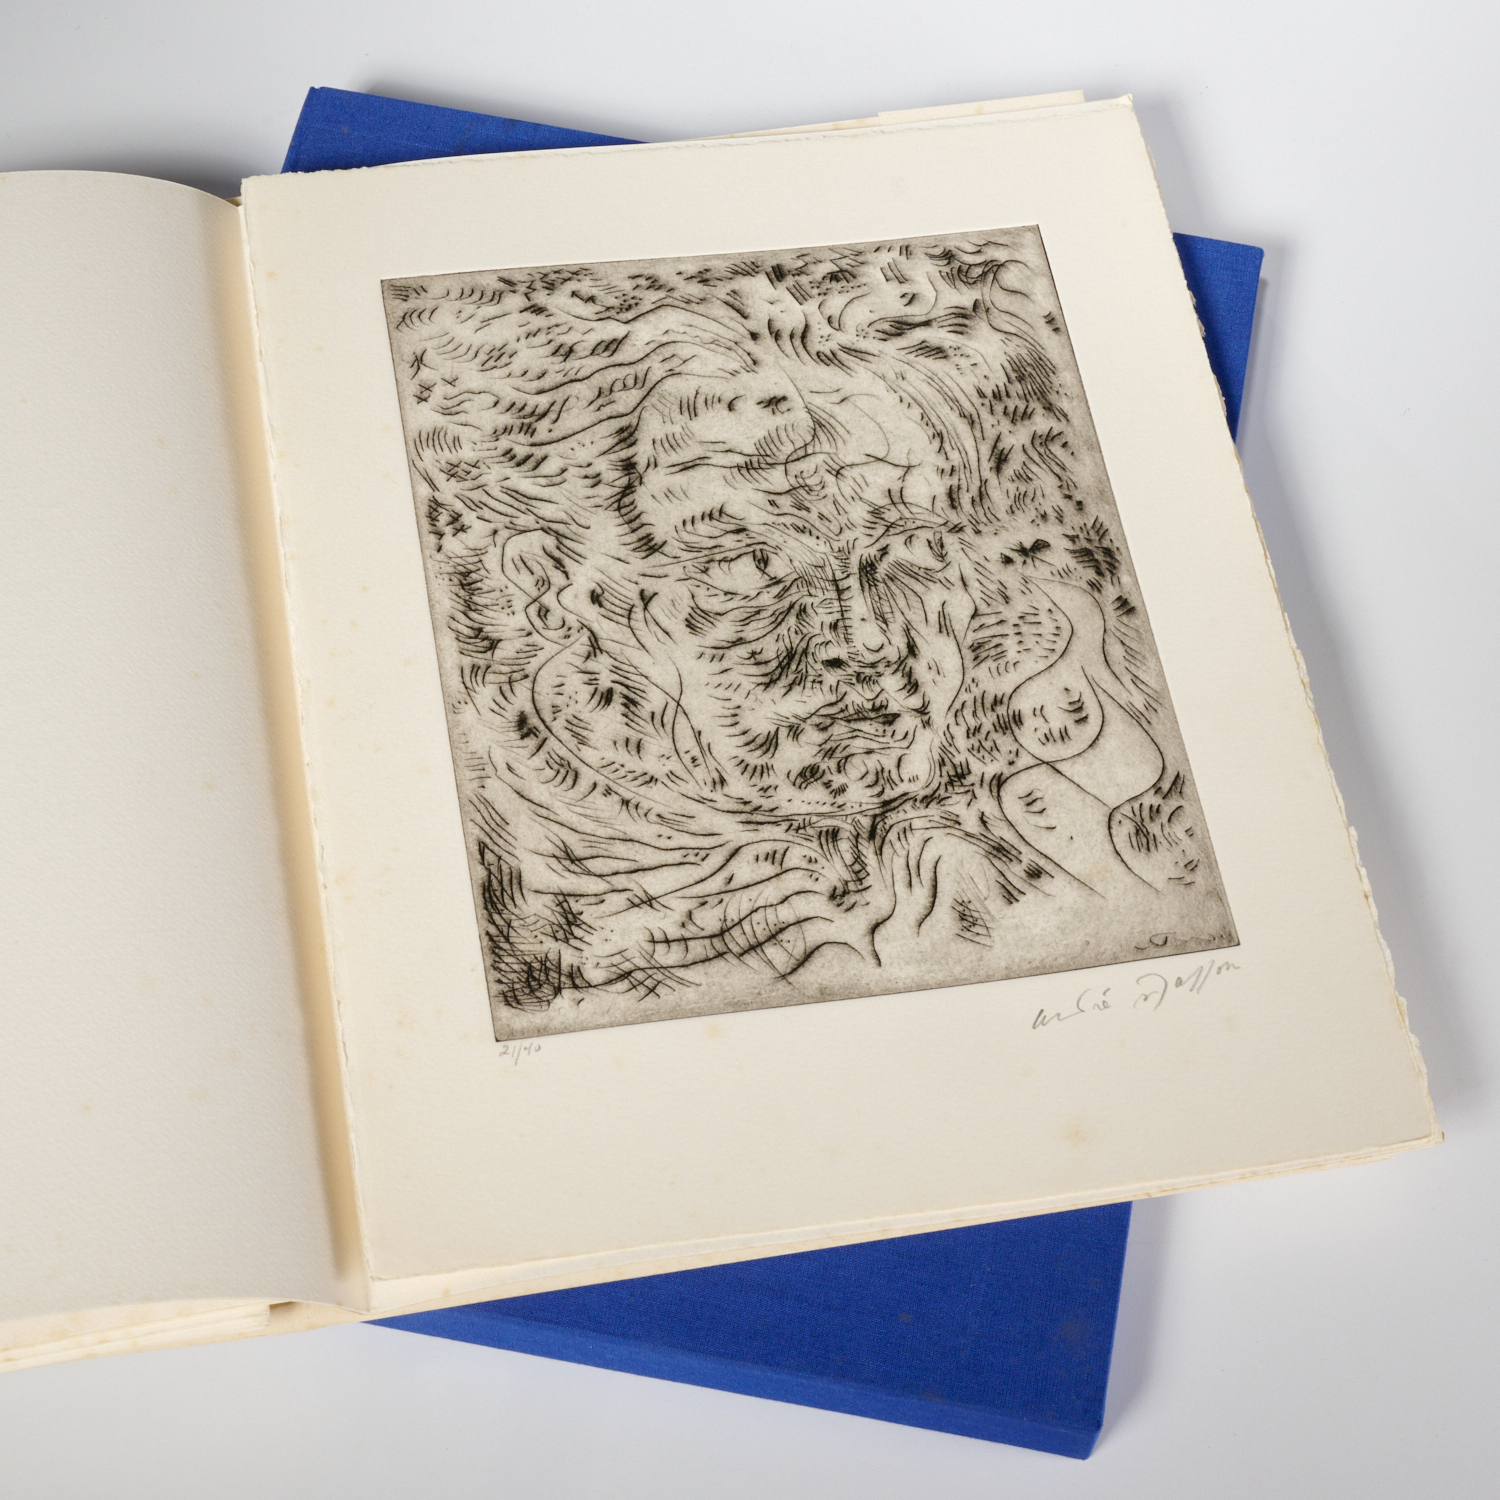 ANDRE MASSON 2 LTD EDS WITH 30bd03